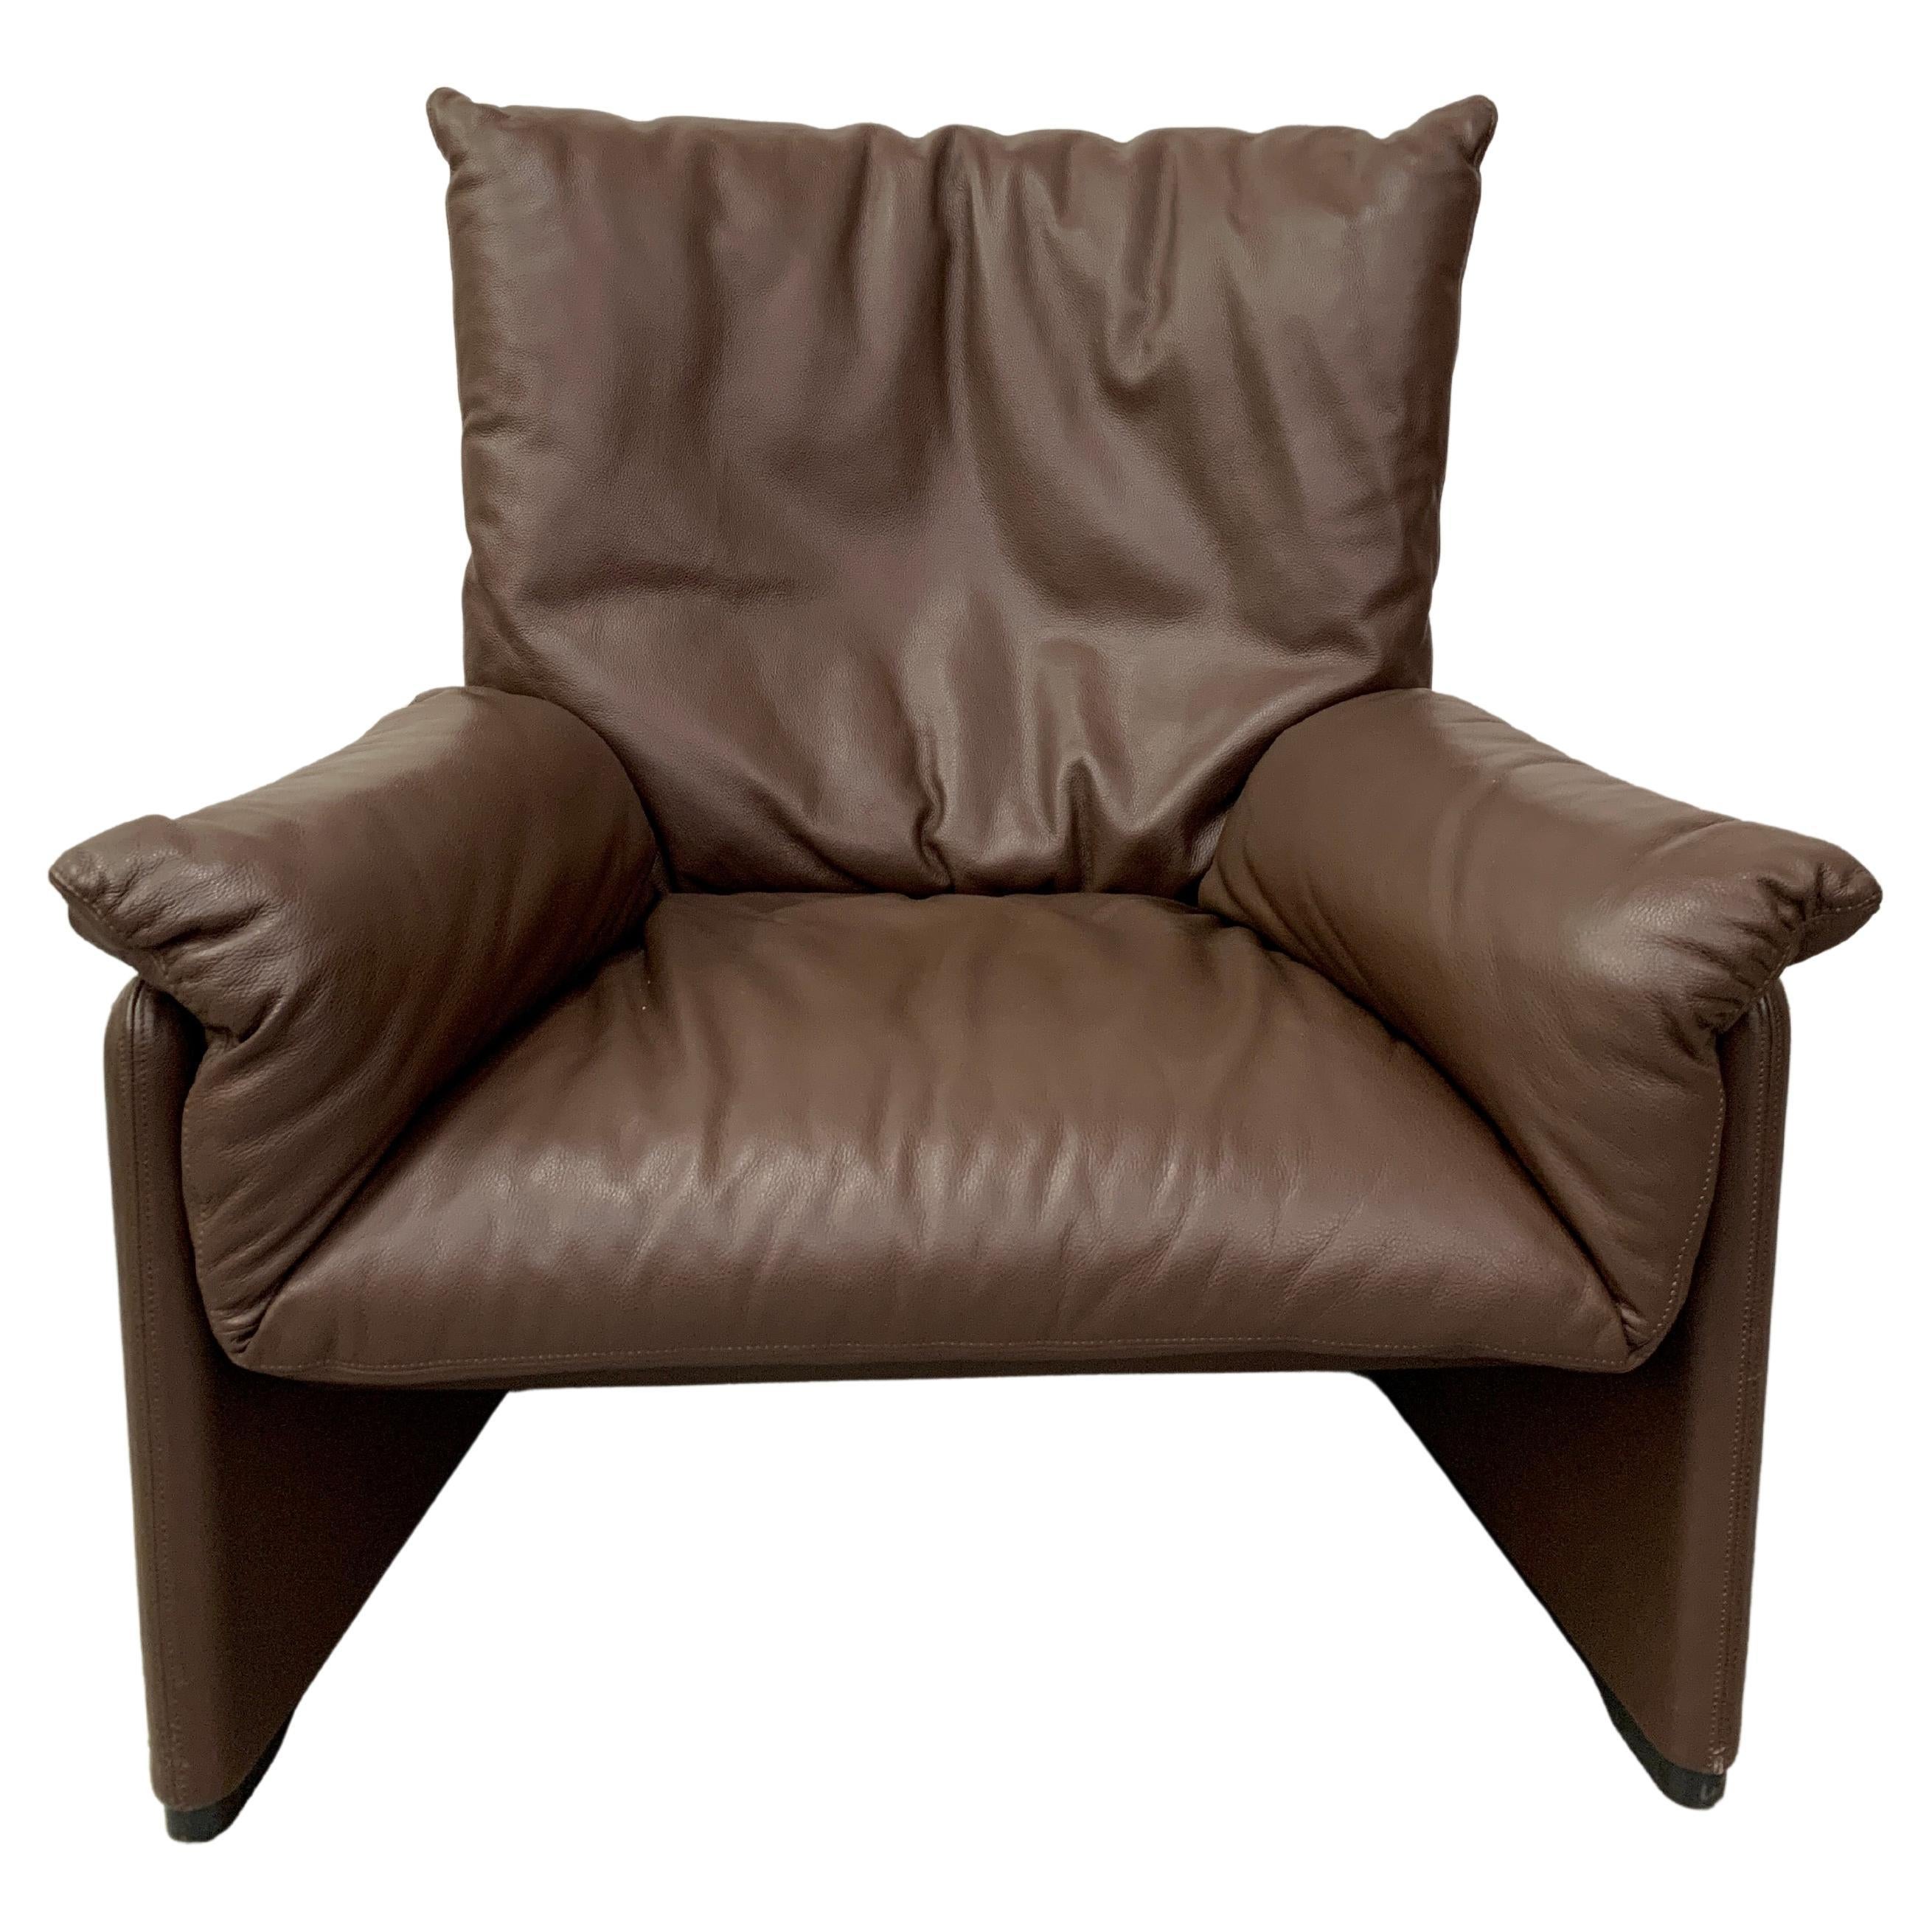 Thick chocolate brown leather lounge chair designed by Vico Magistretti
Chair measures 36.5